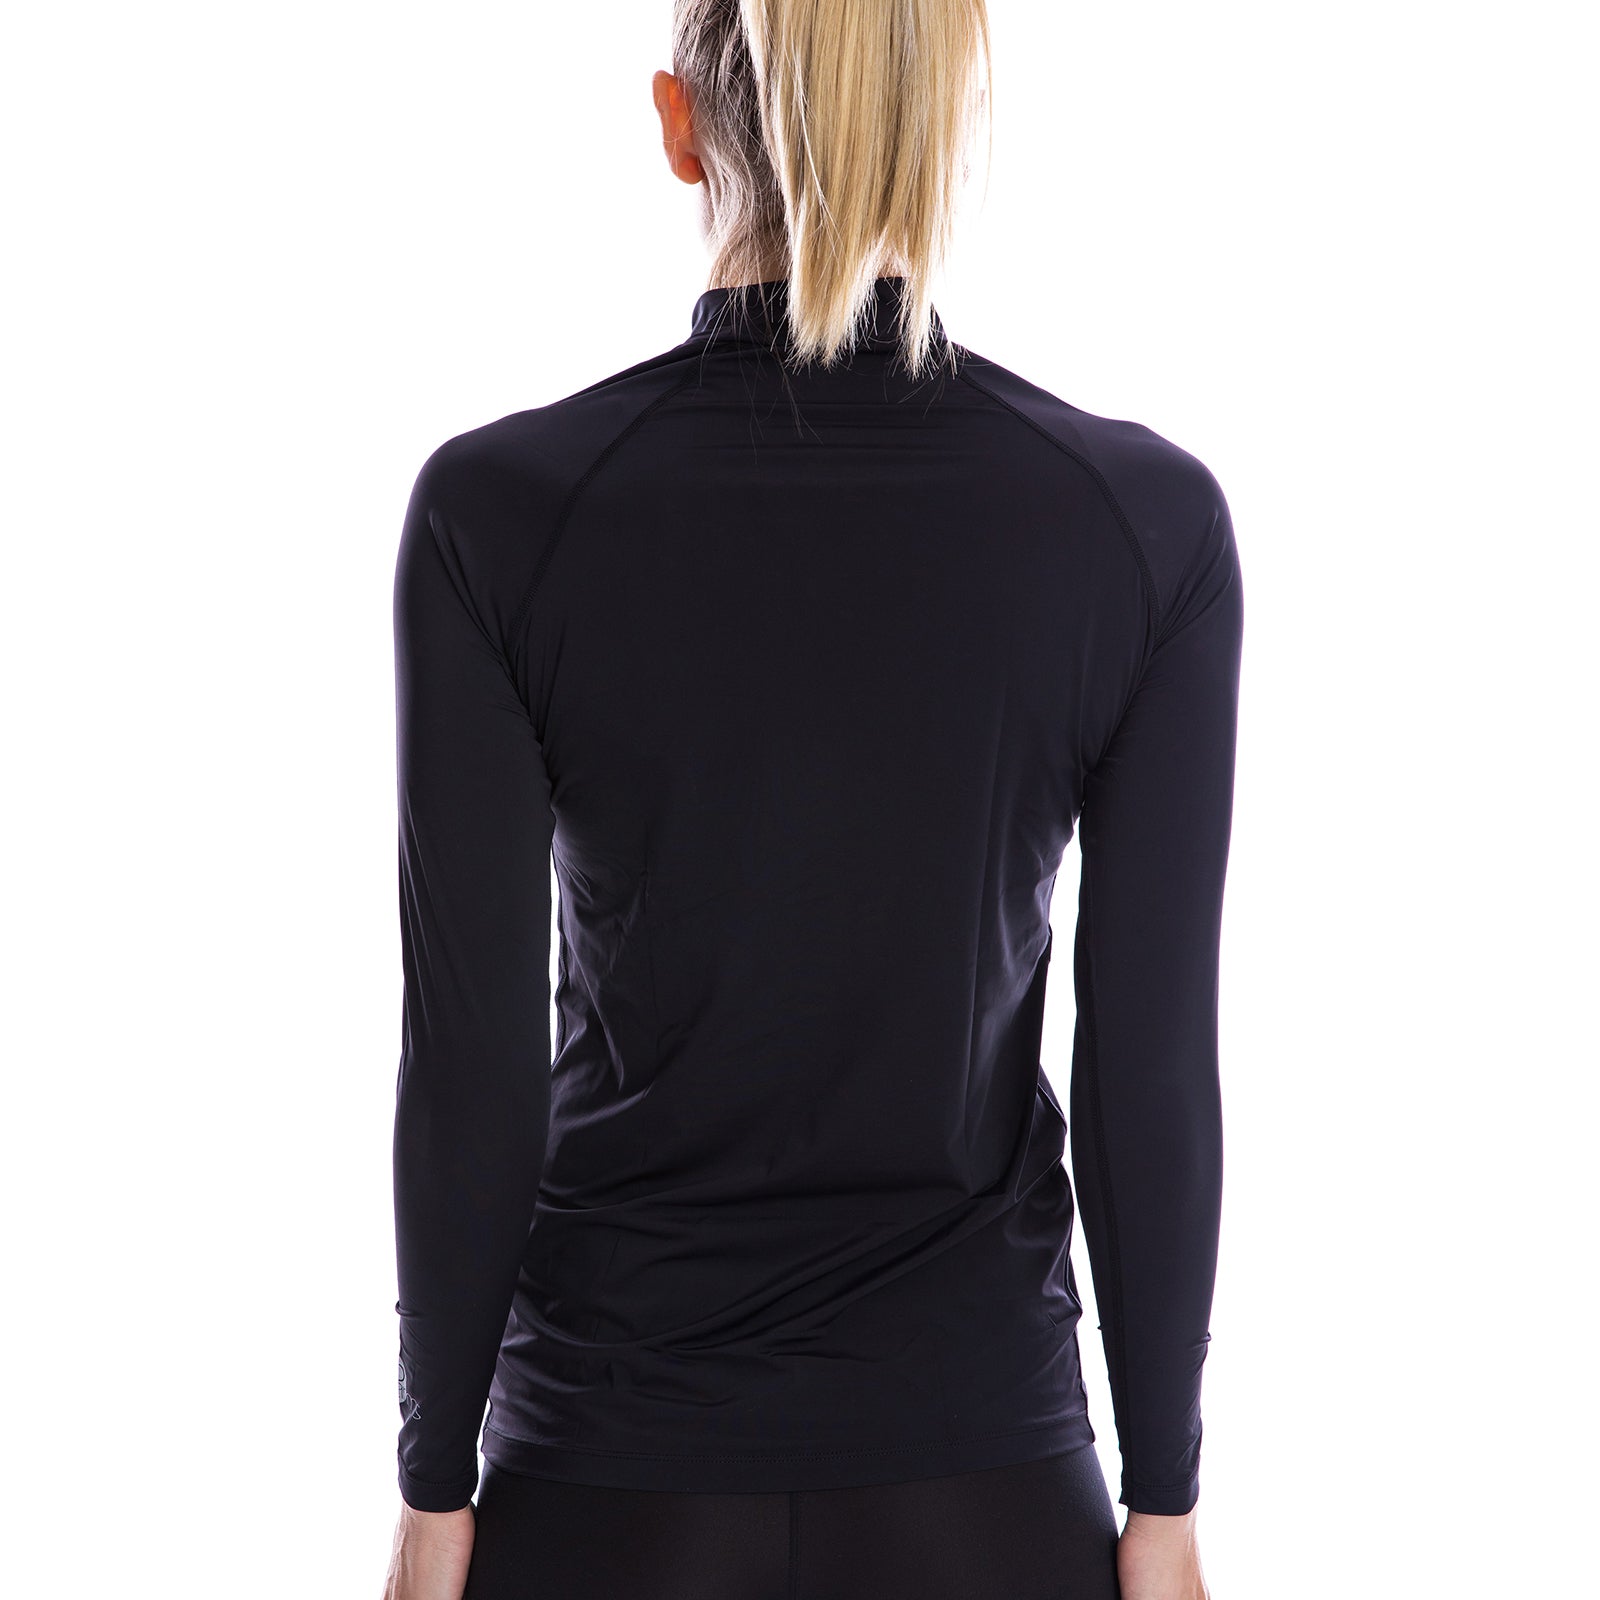 SParms, SP Body Women's high neck